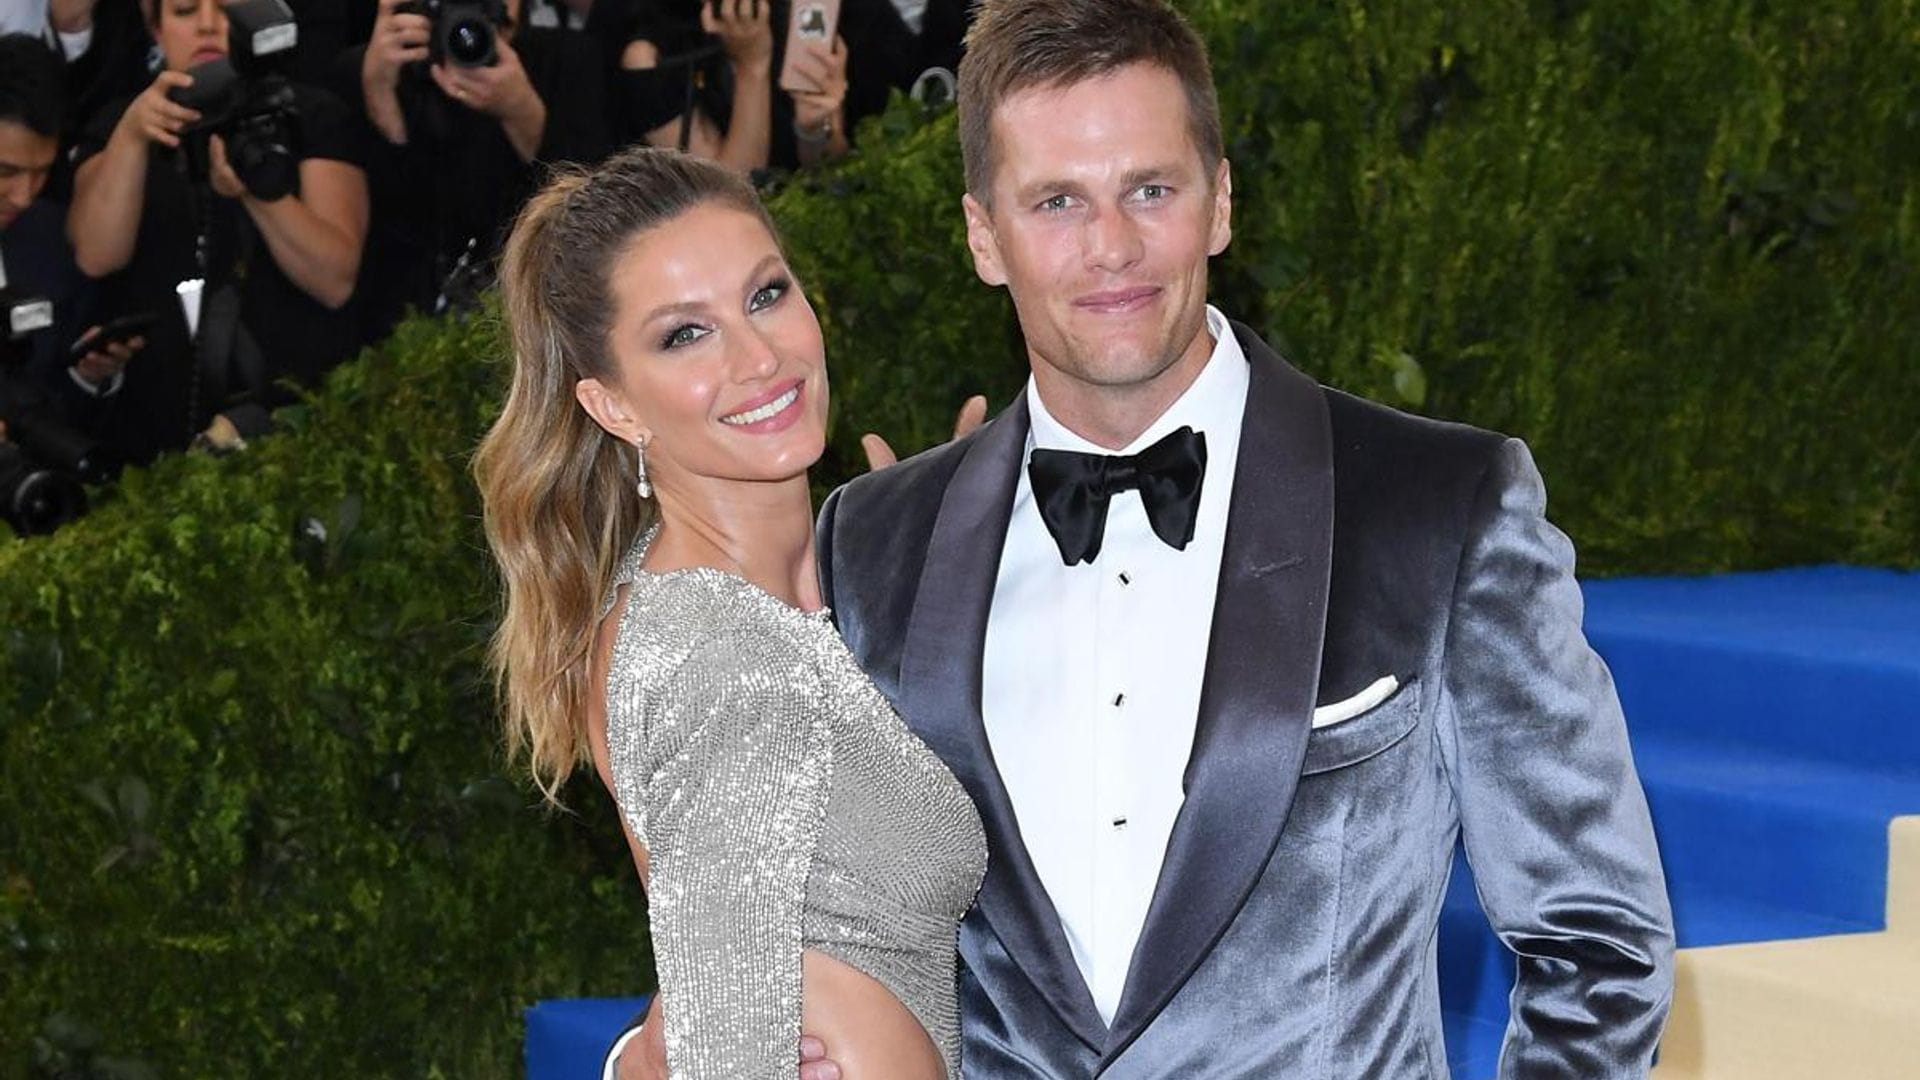 Tom Brady focuses on spending time with his son Jack amid divorce rumors with Gisele Bündchen